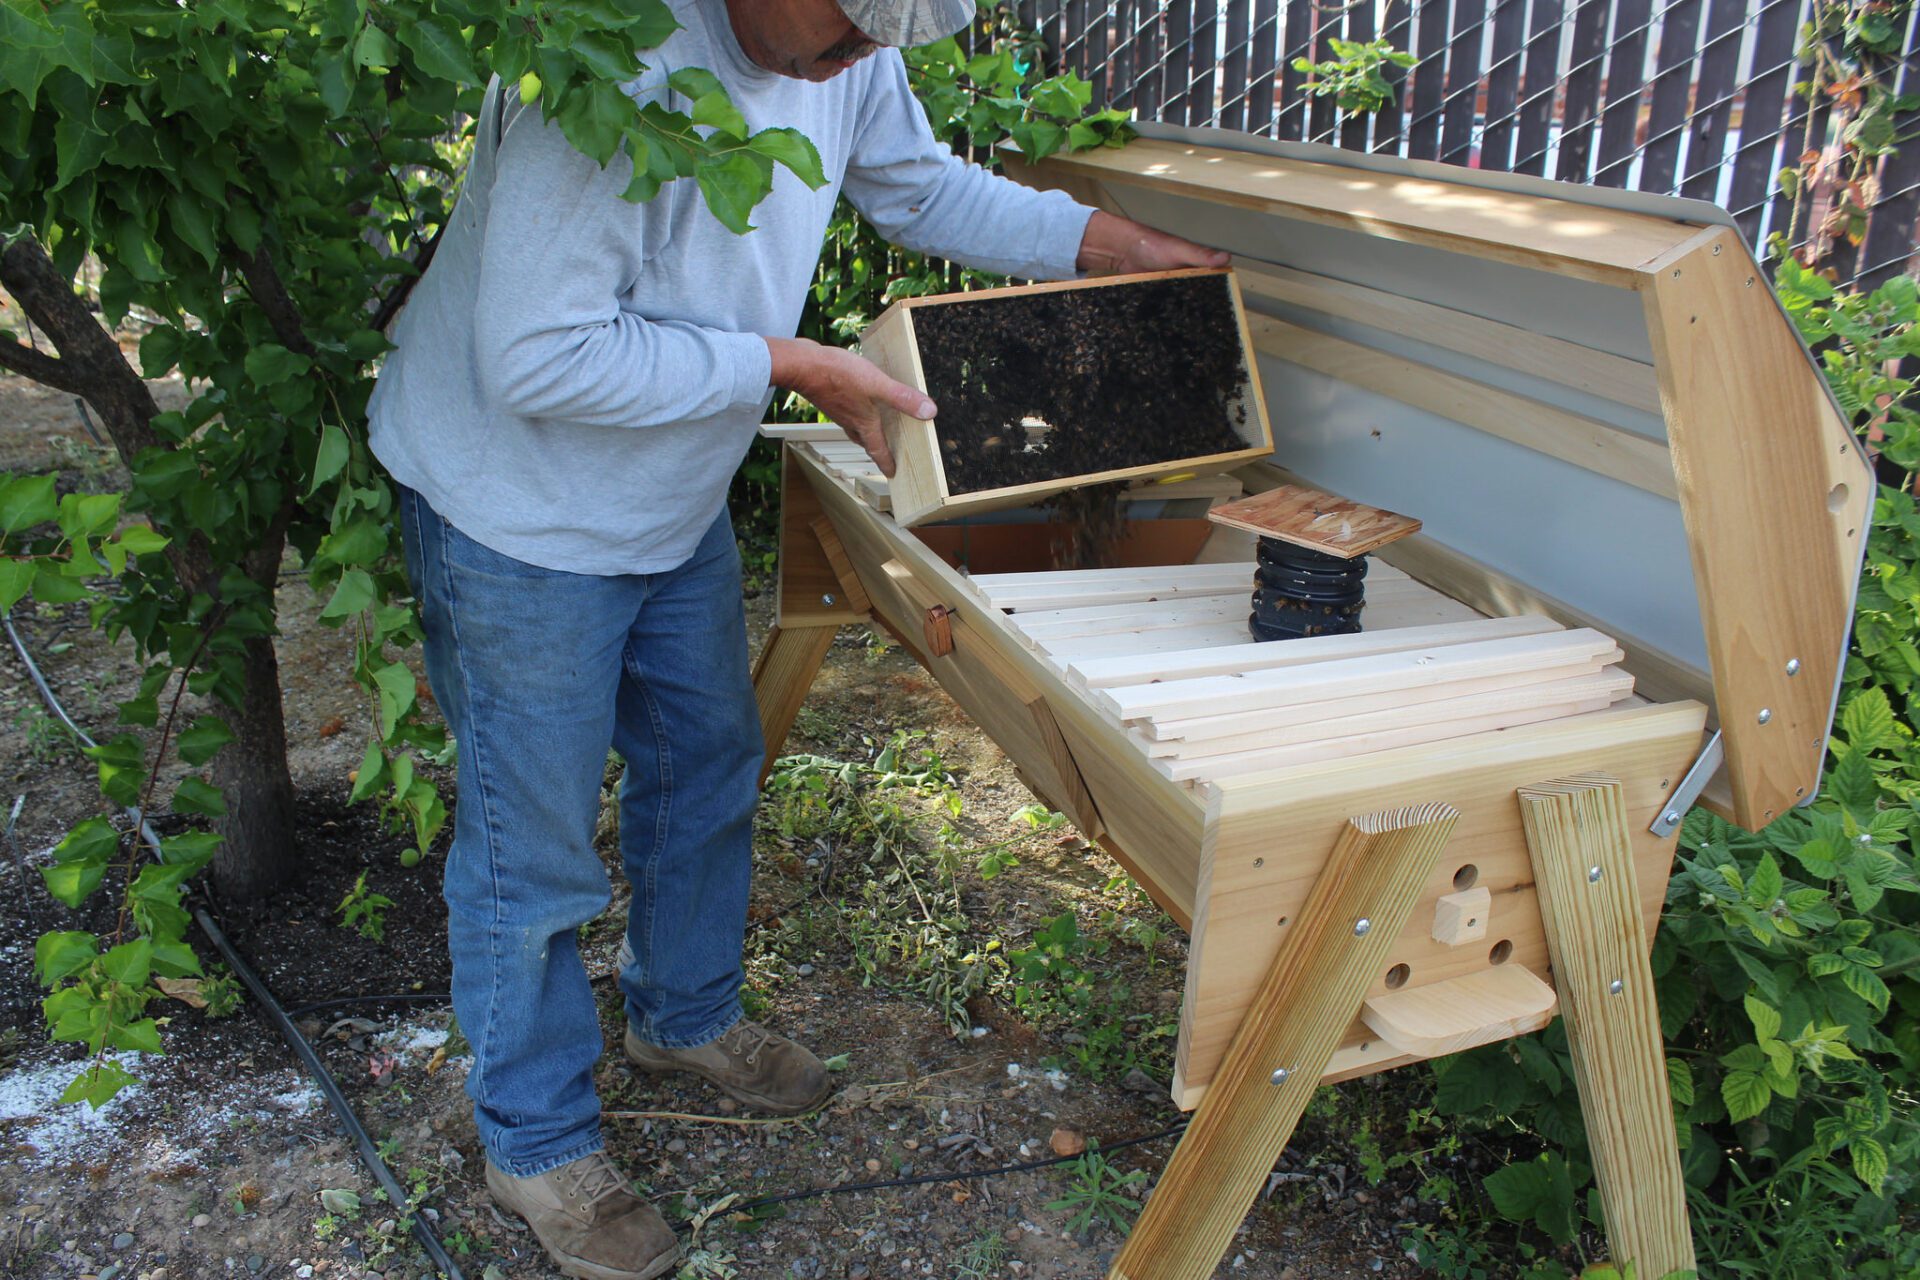 Introducing bees into the hive